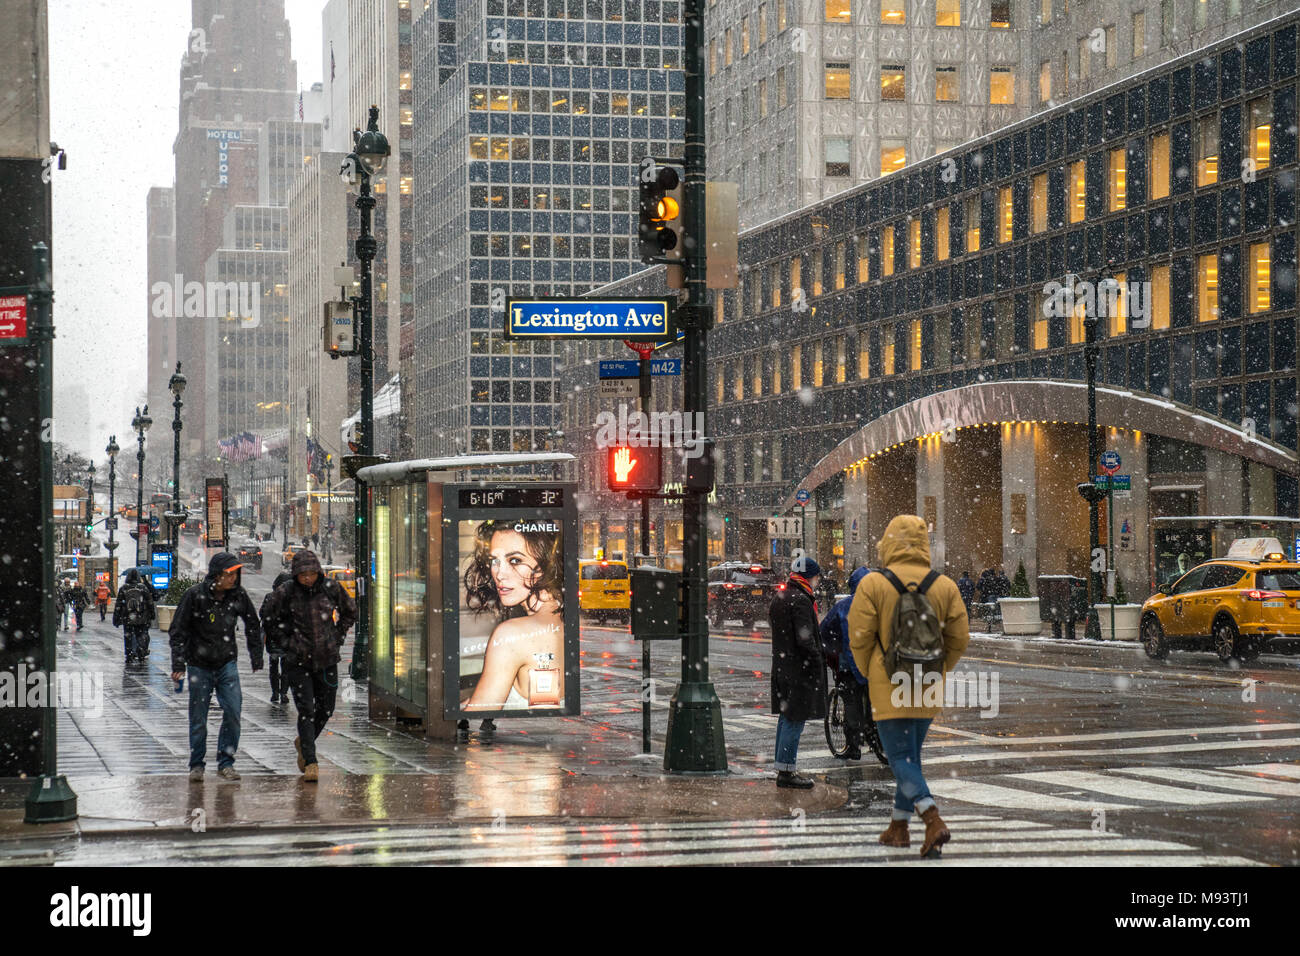 New York, USA. 21 March 2018.  People just continue their normal life under a snowstorm in New York city.  Photo by Enrique Shore/Alamy Stock Photo Stock Photo